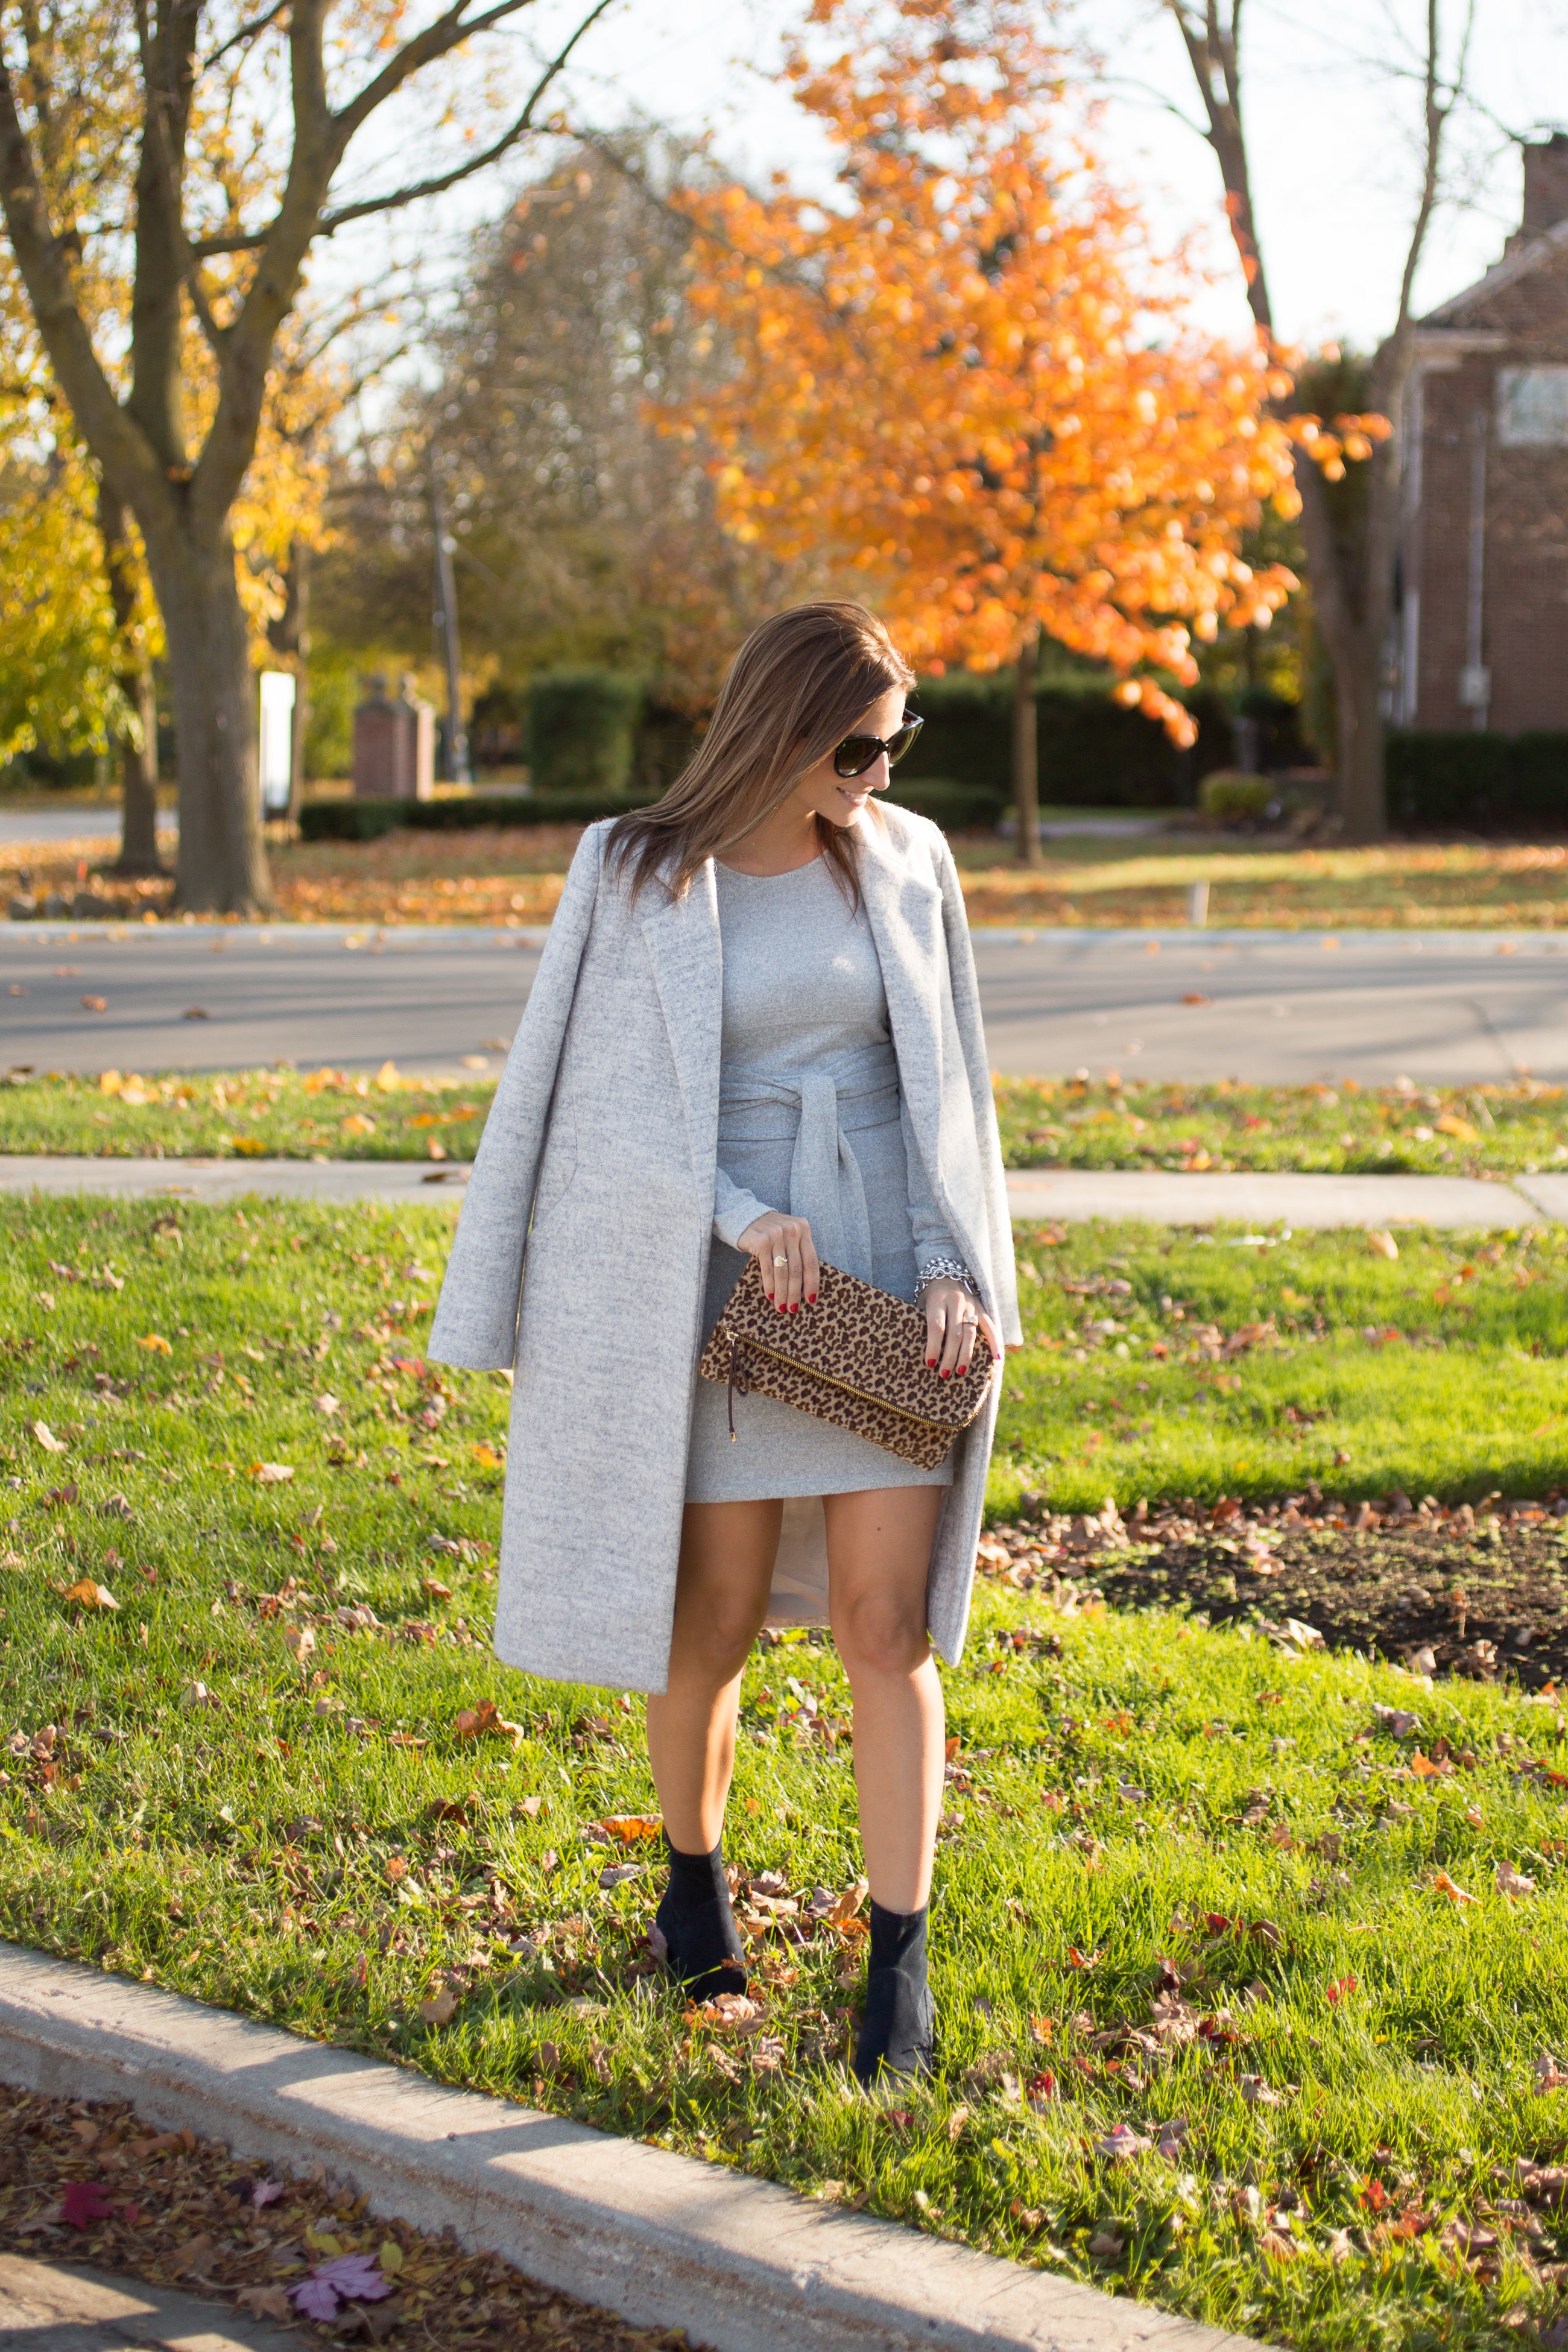 Fall look with a grey sweater dress from Dynamite, long grey coat, and leopard clutch.  Pointed toe black sock boots from Call it spring